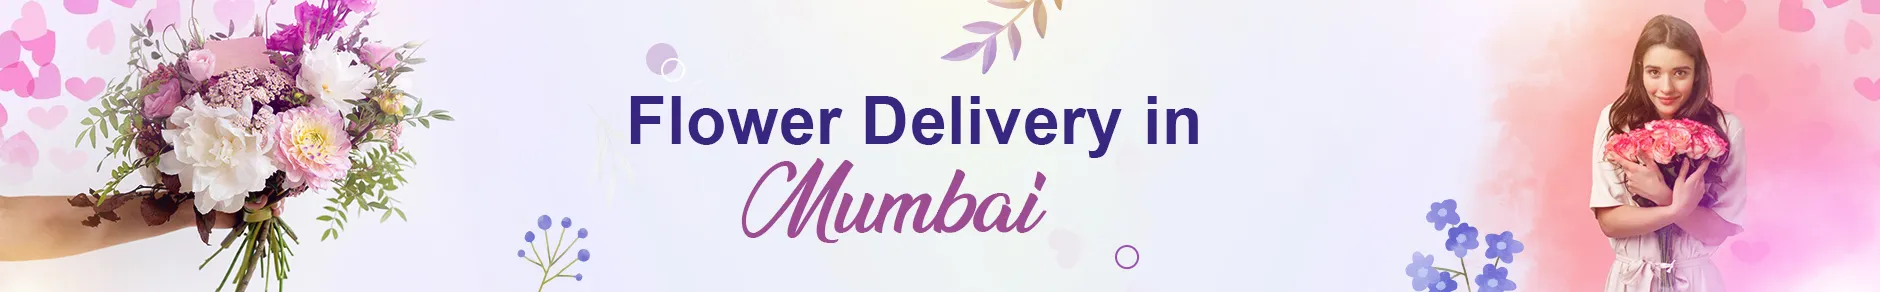 Flower Delivery in Mumbai | Send Flowers to Mumbai in 2 hours | Free Delivery